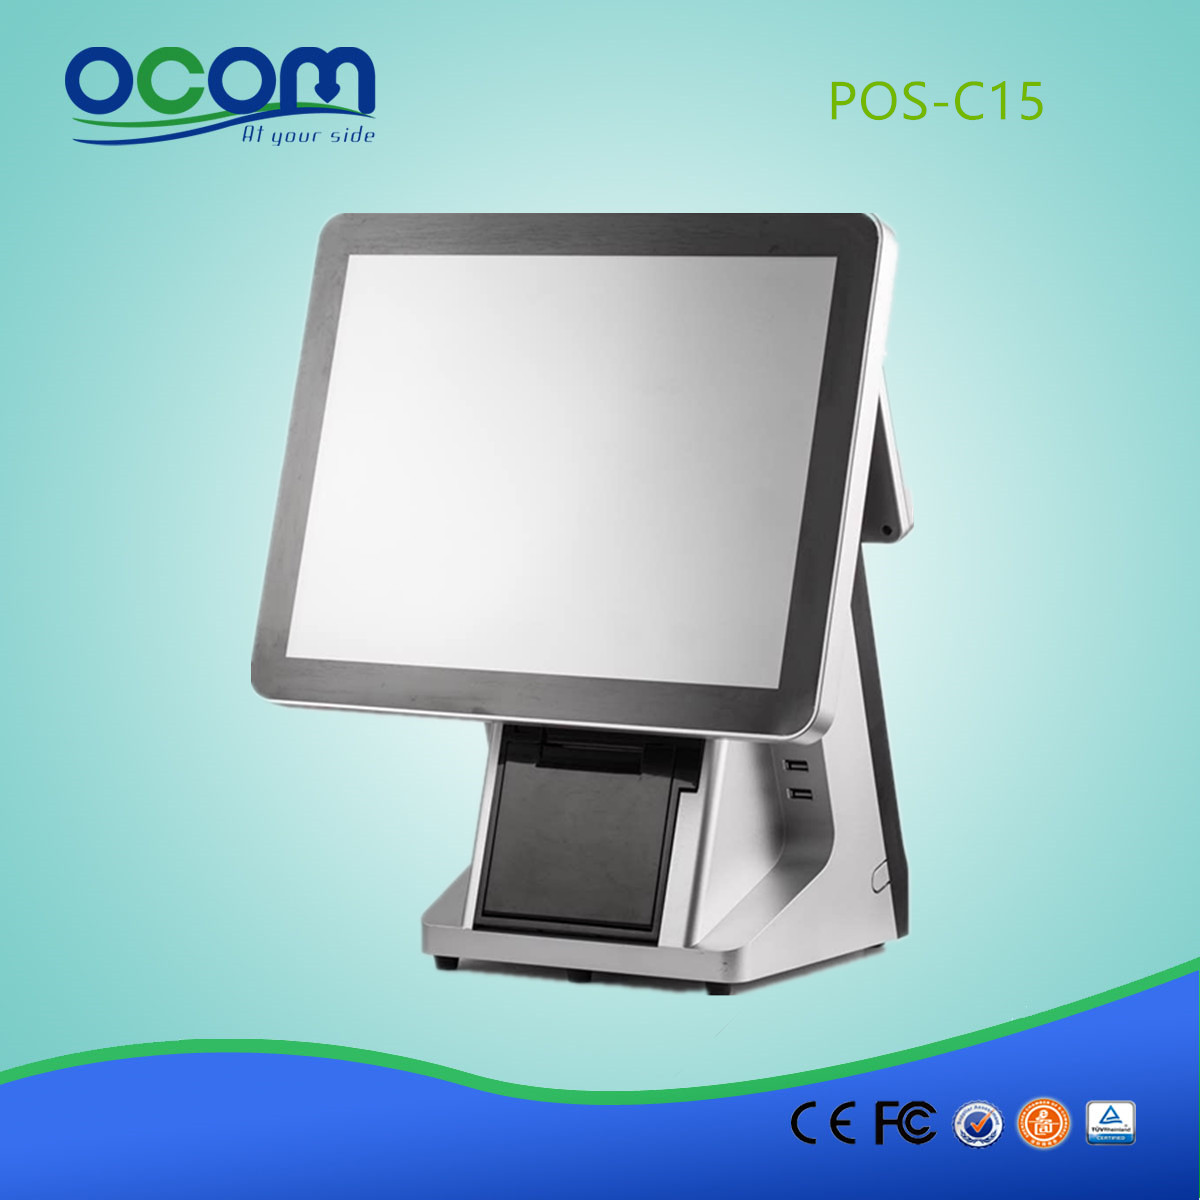 POS-C15-China fabriek gemaakt 15 inch alles in een touch-screen android smart pos terminal